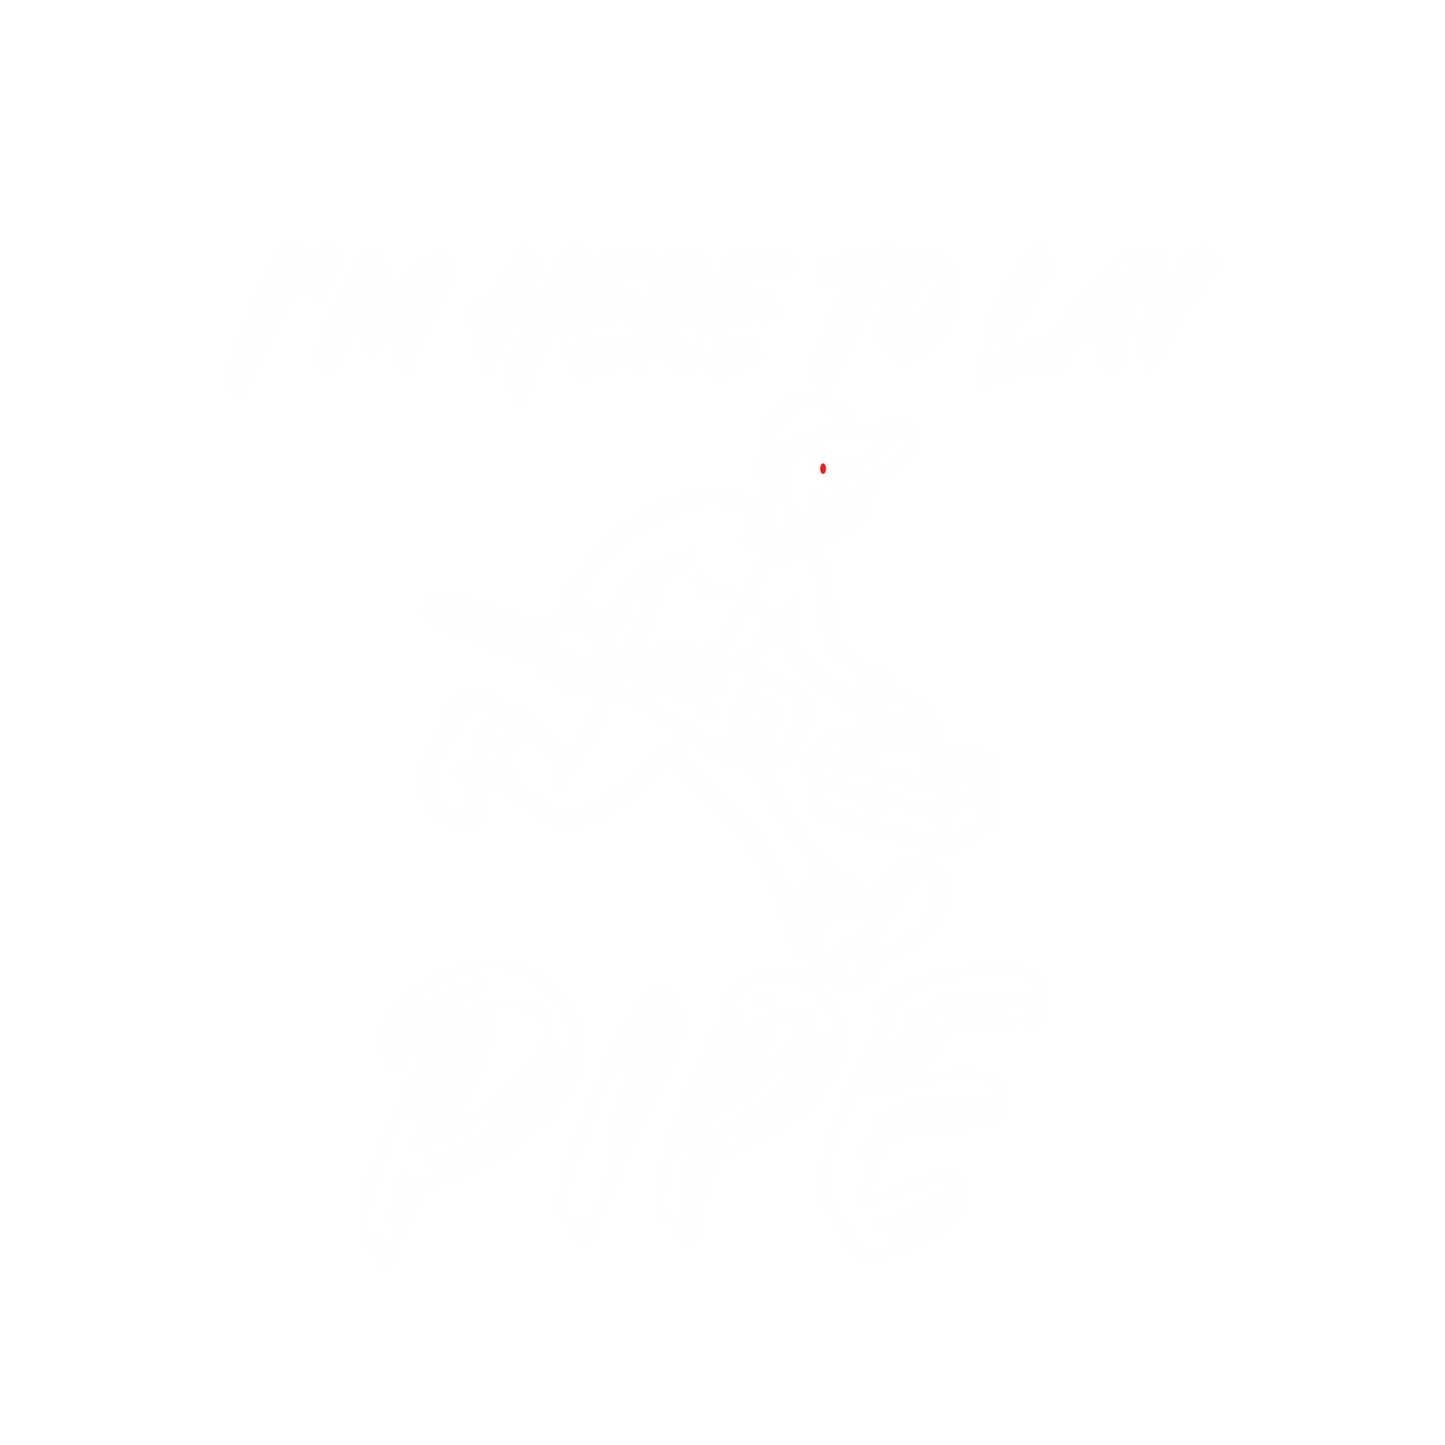 I'm Here To Lay Pipe, New